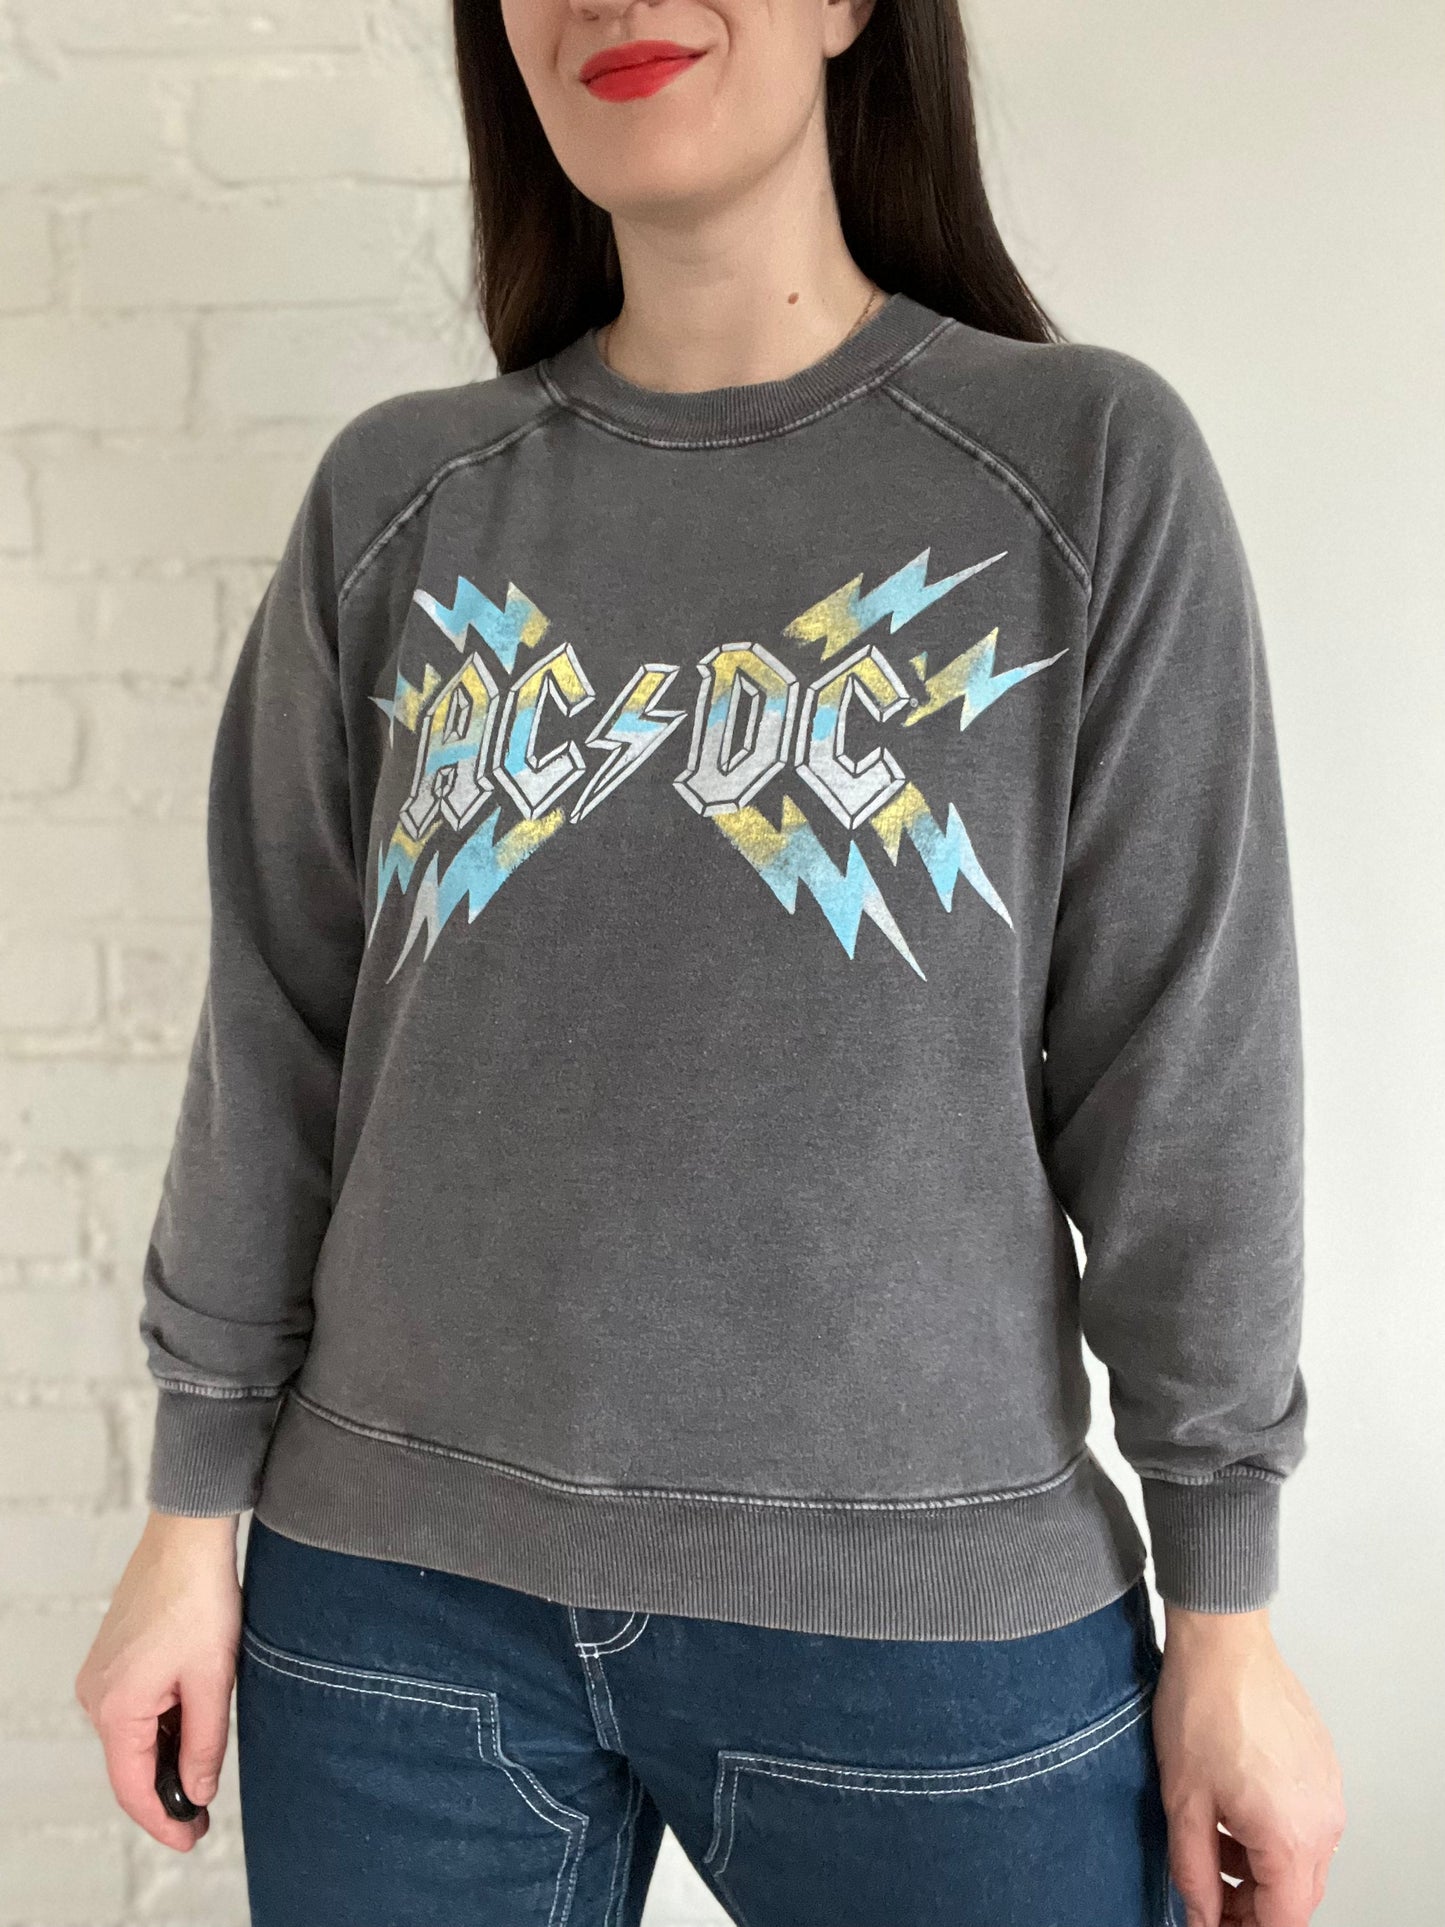 Modern AC/DC Washed Out Sweater - Oversized XS